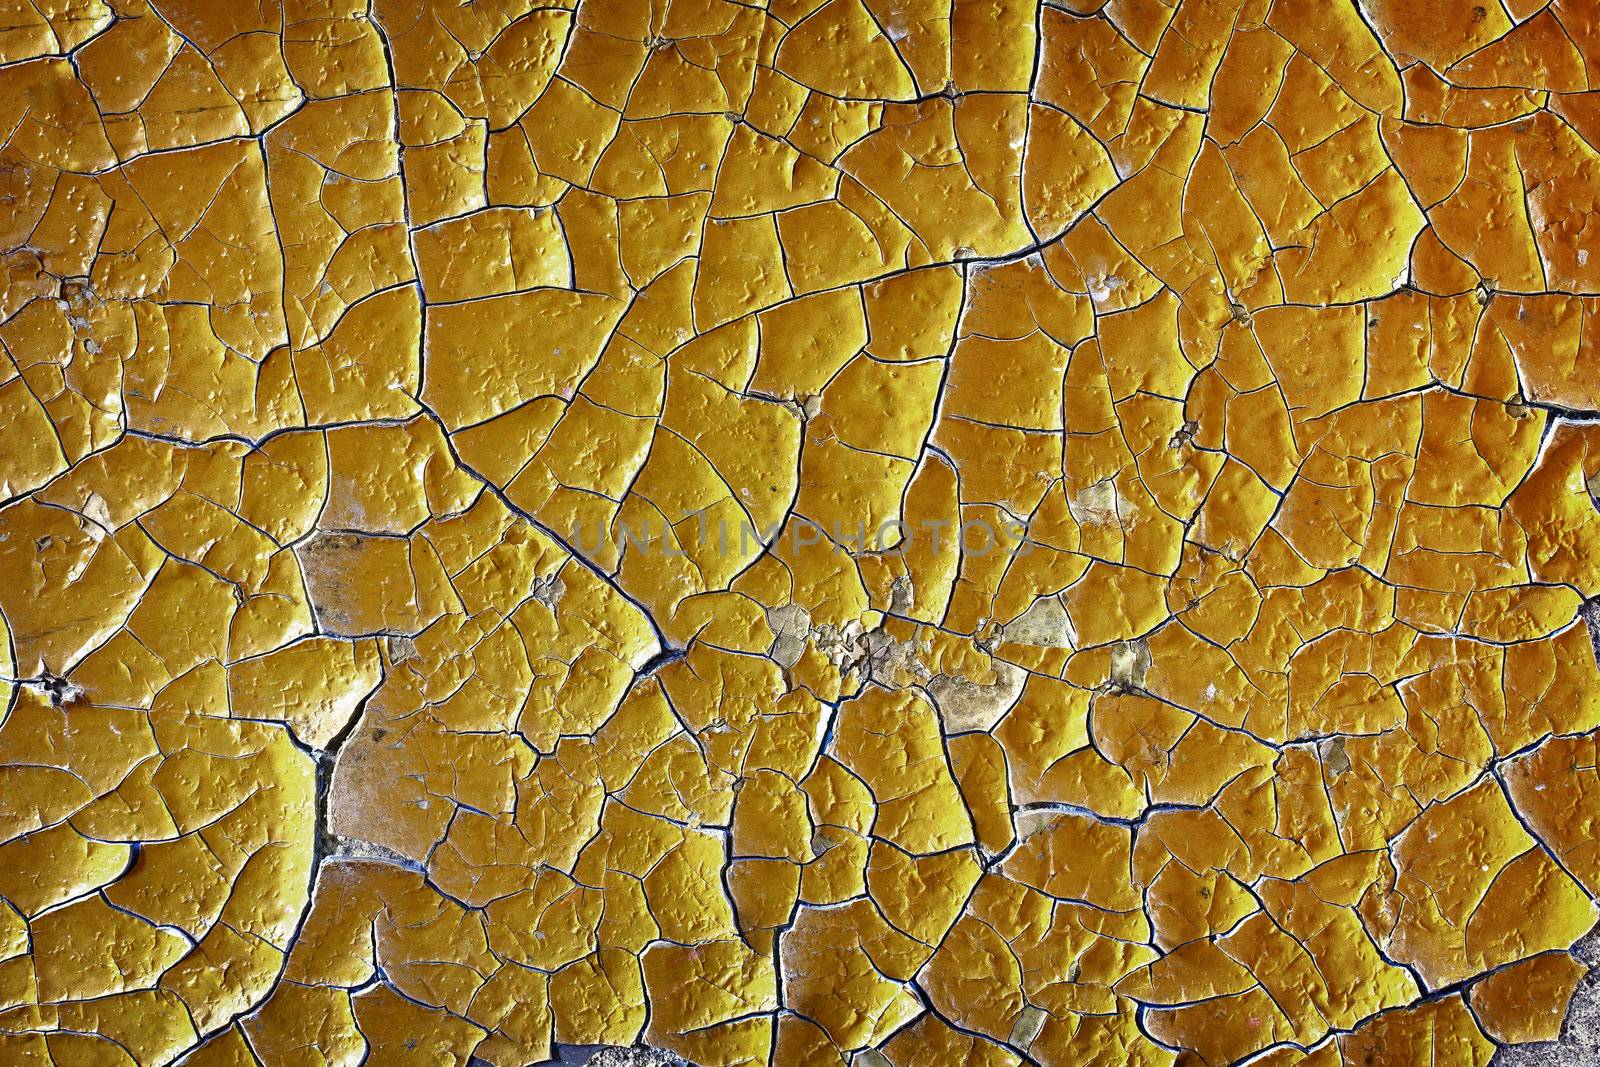 Large cracks on the surface of the old oil paint